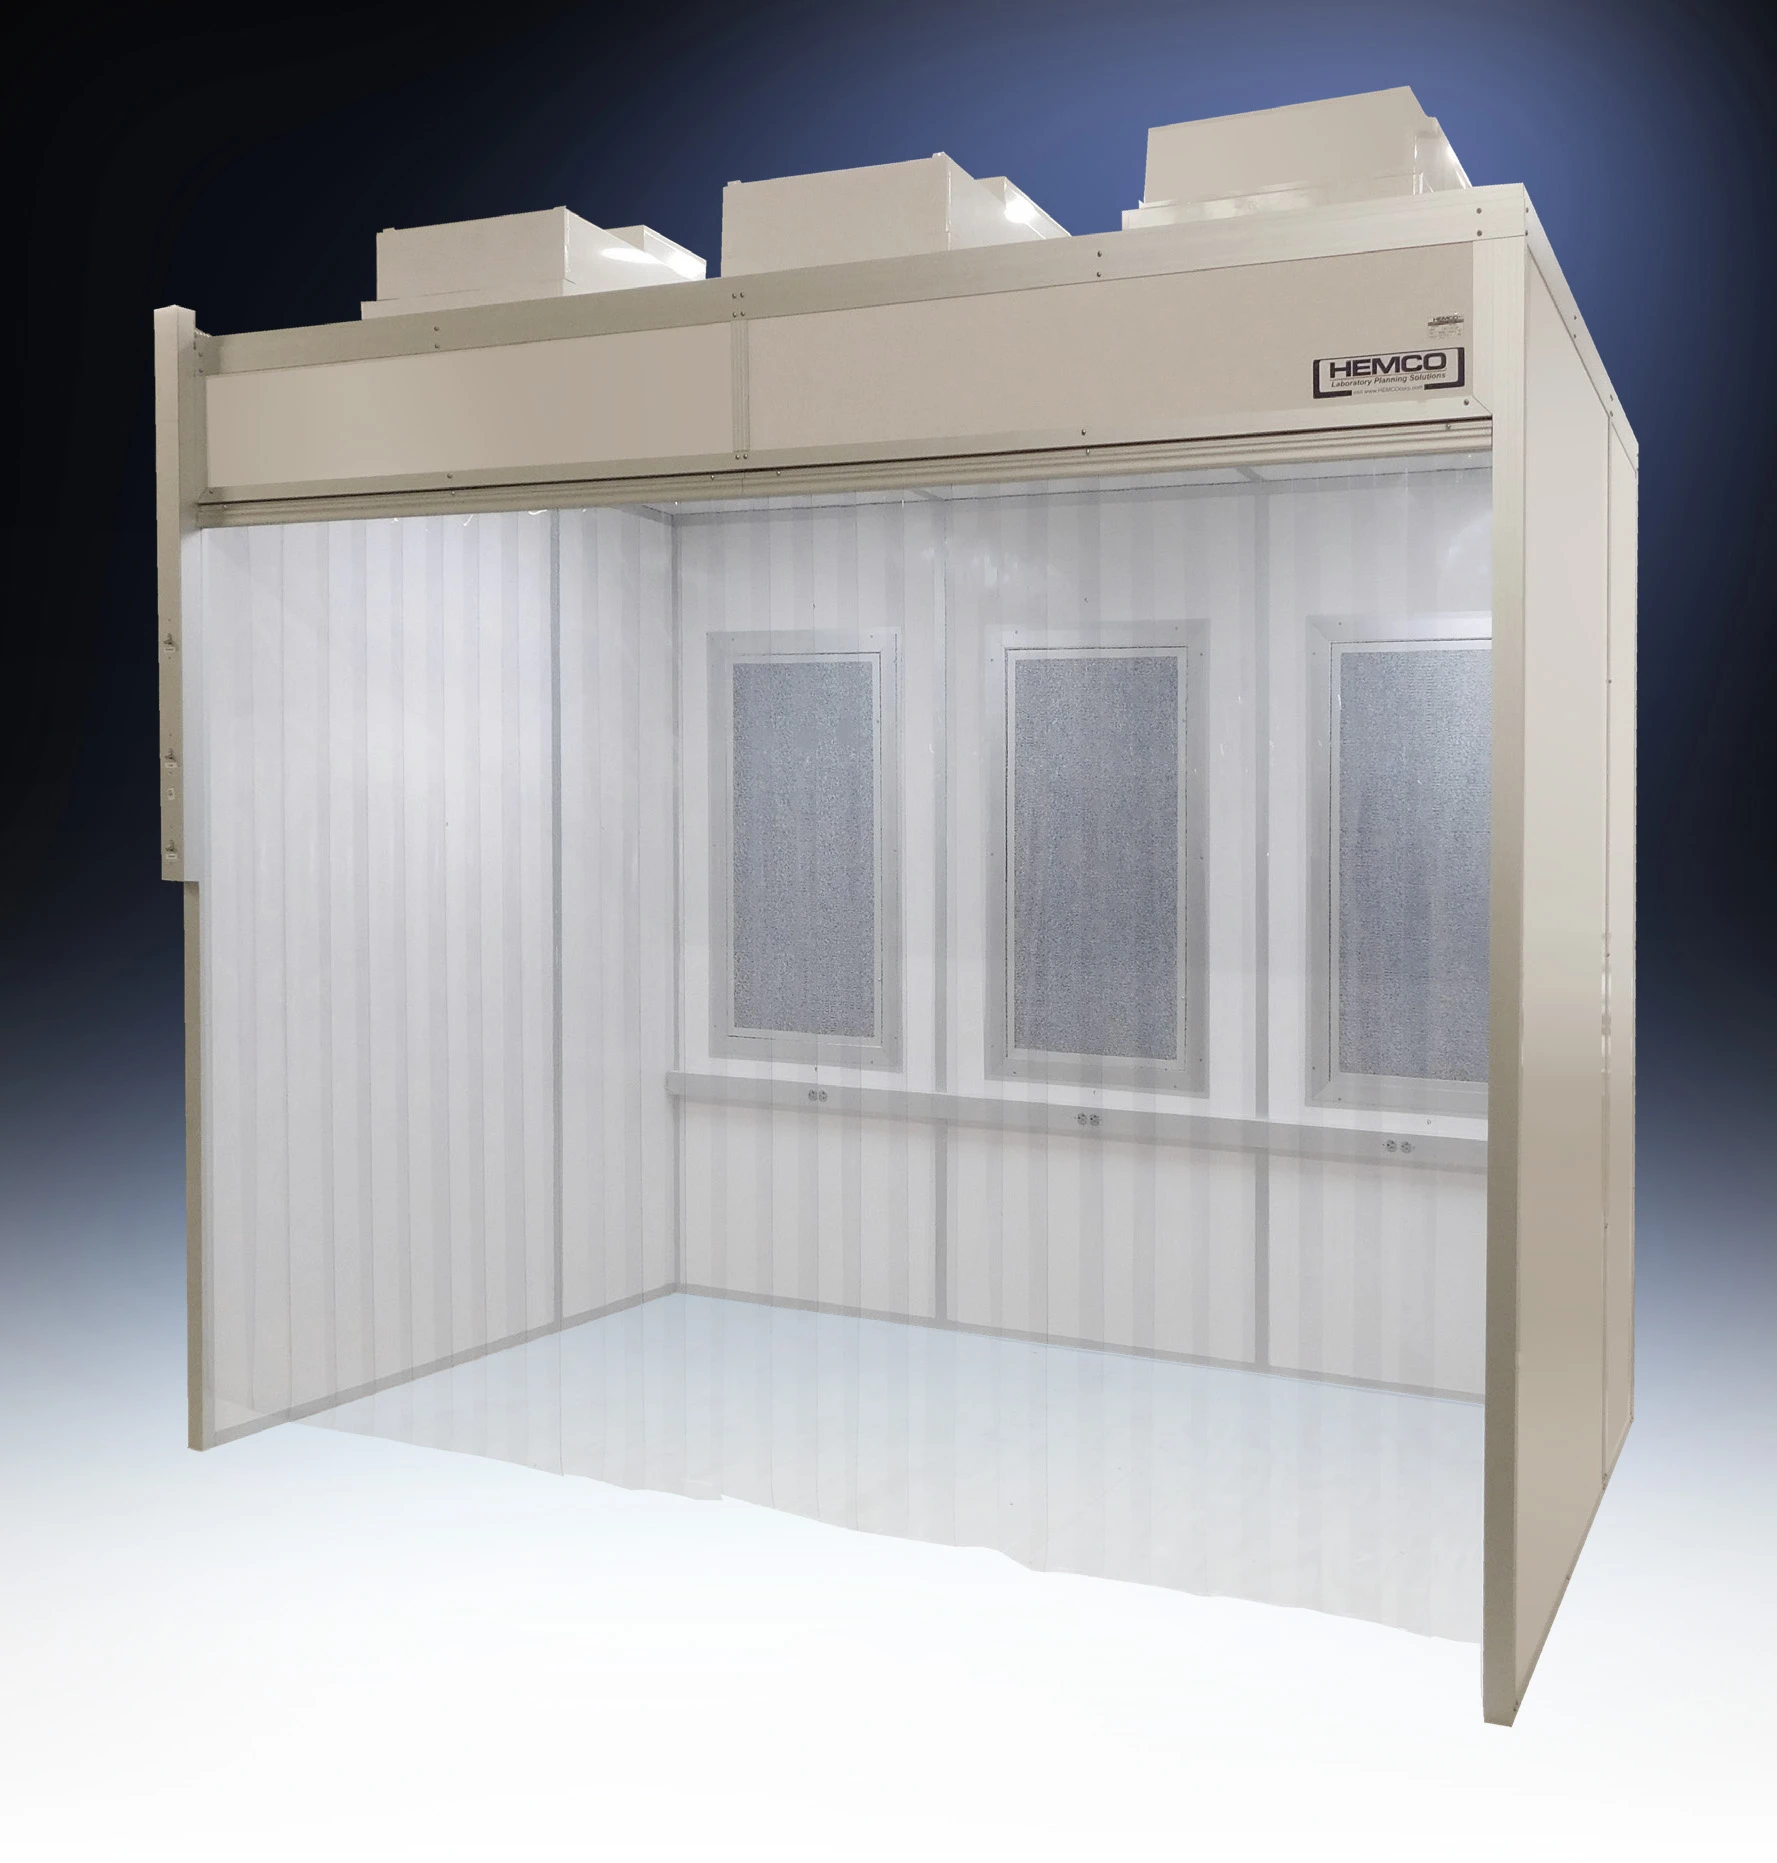 C.C.S Containment Control Systems from HEMCO